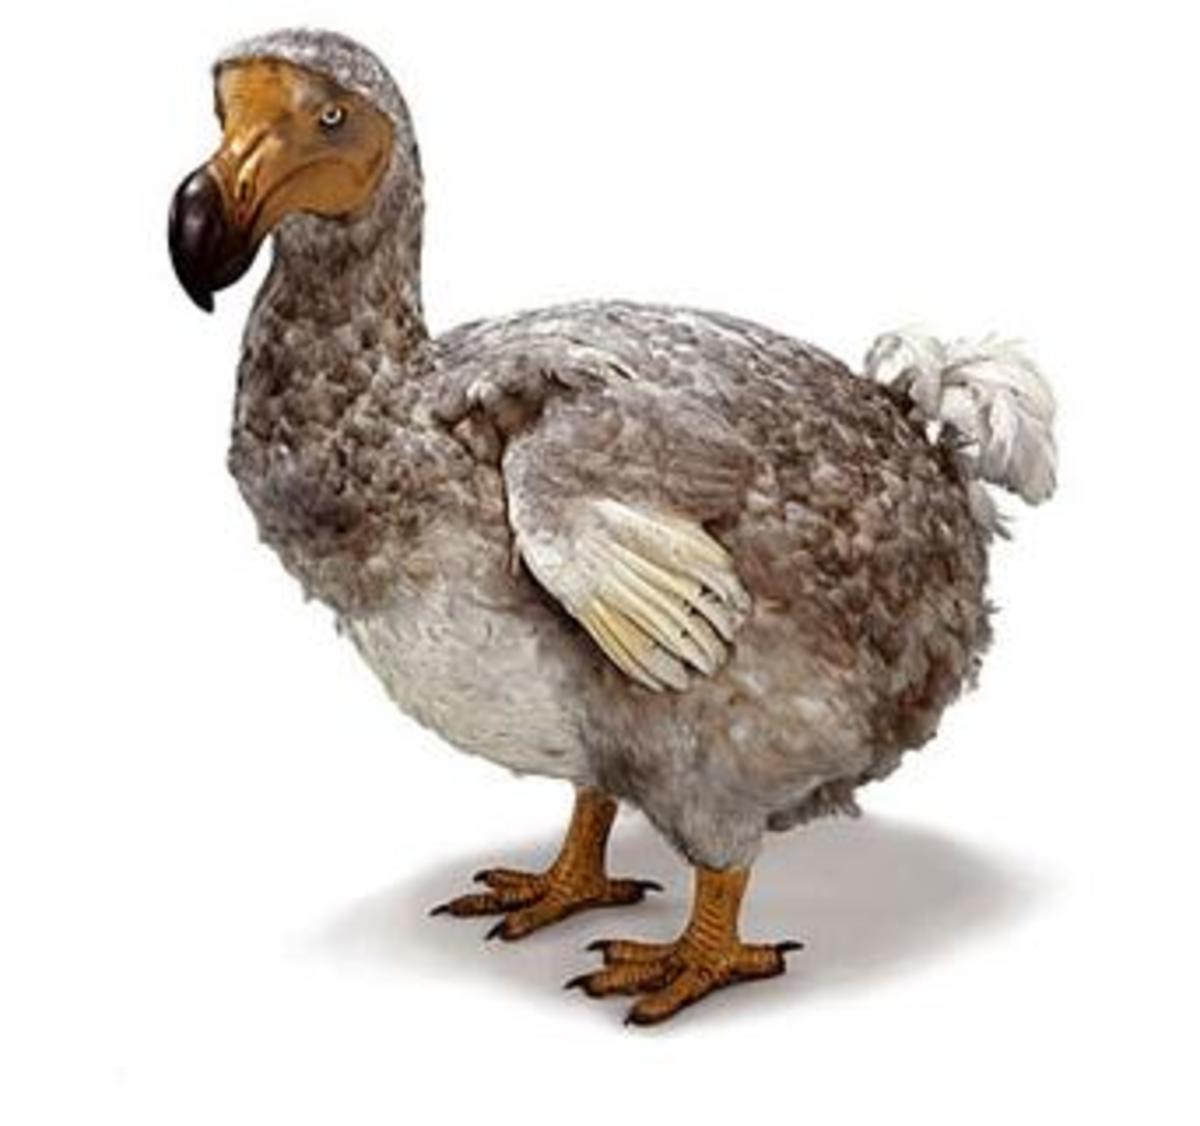 Dodo bird, went extinct at at the end of the 17th century due to over hunting and the introduction of cats, dogs, and pigs to its habitat.